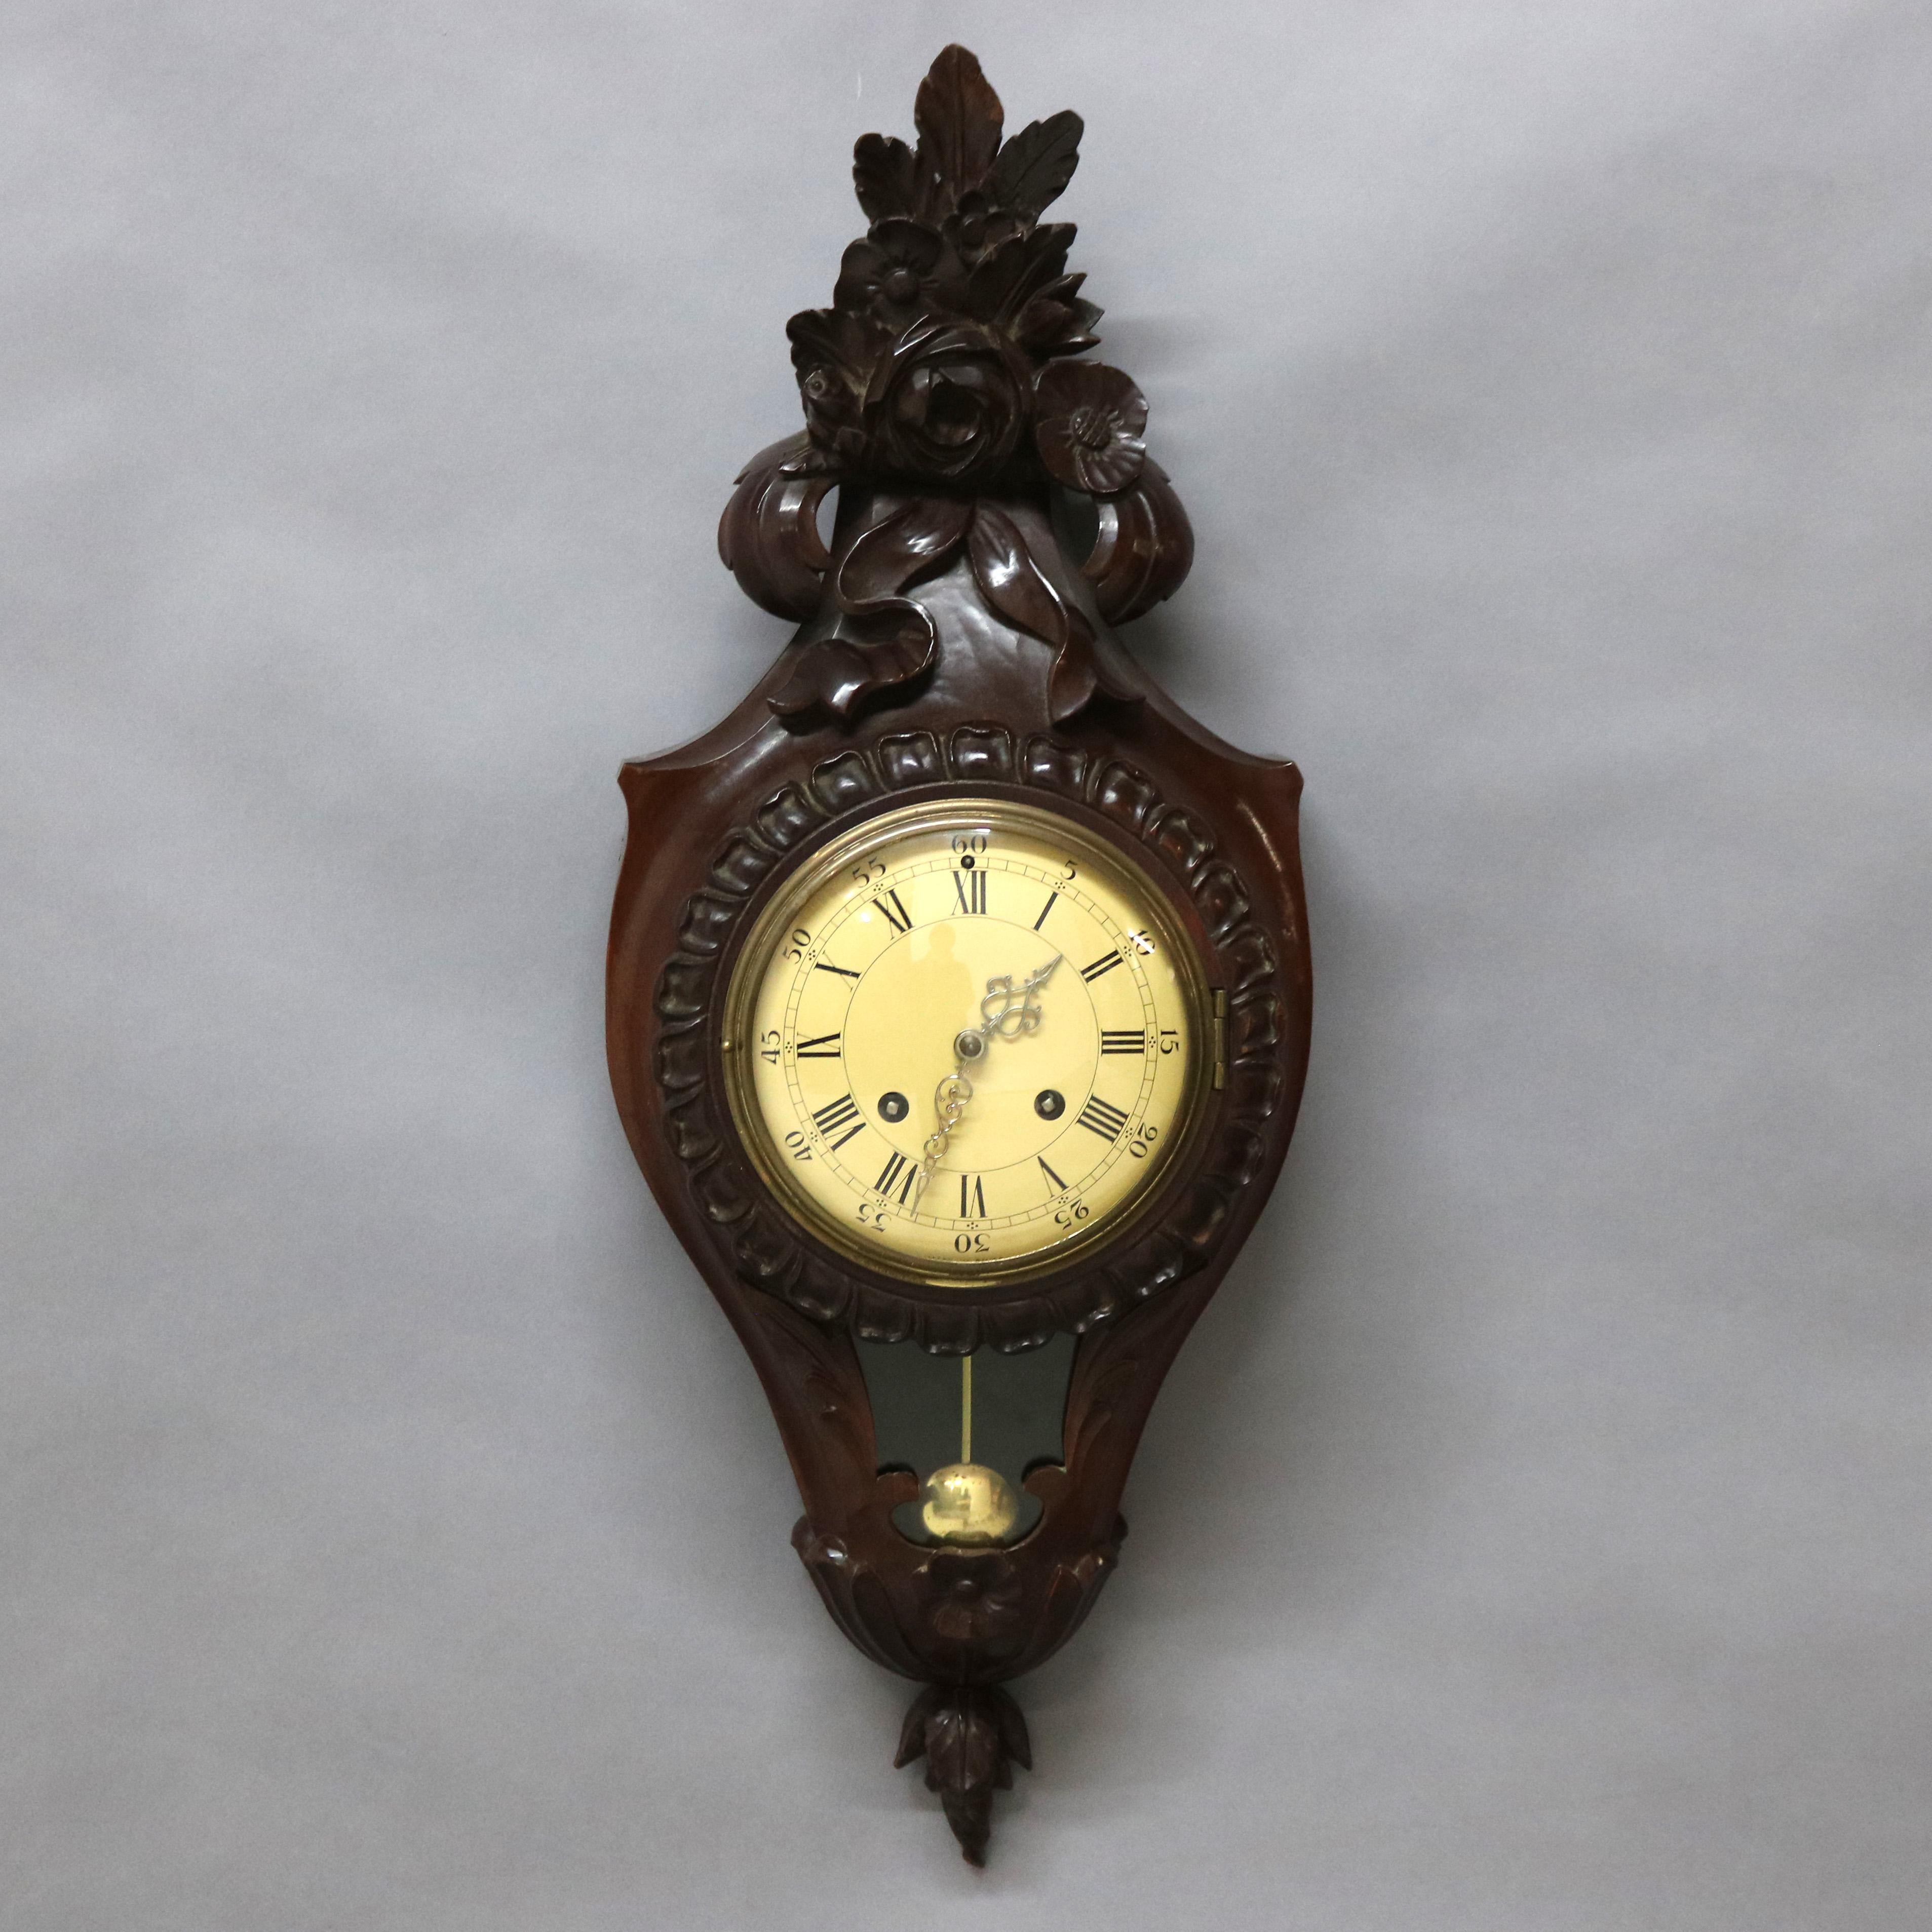 A French style Swiss 8-day wall clock offers carved mahogany case with floral elements, with key, 20th century

Measures - 28